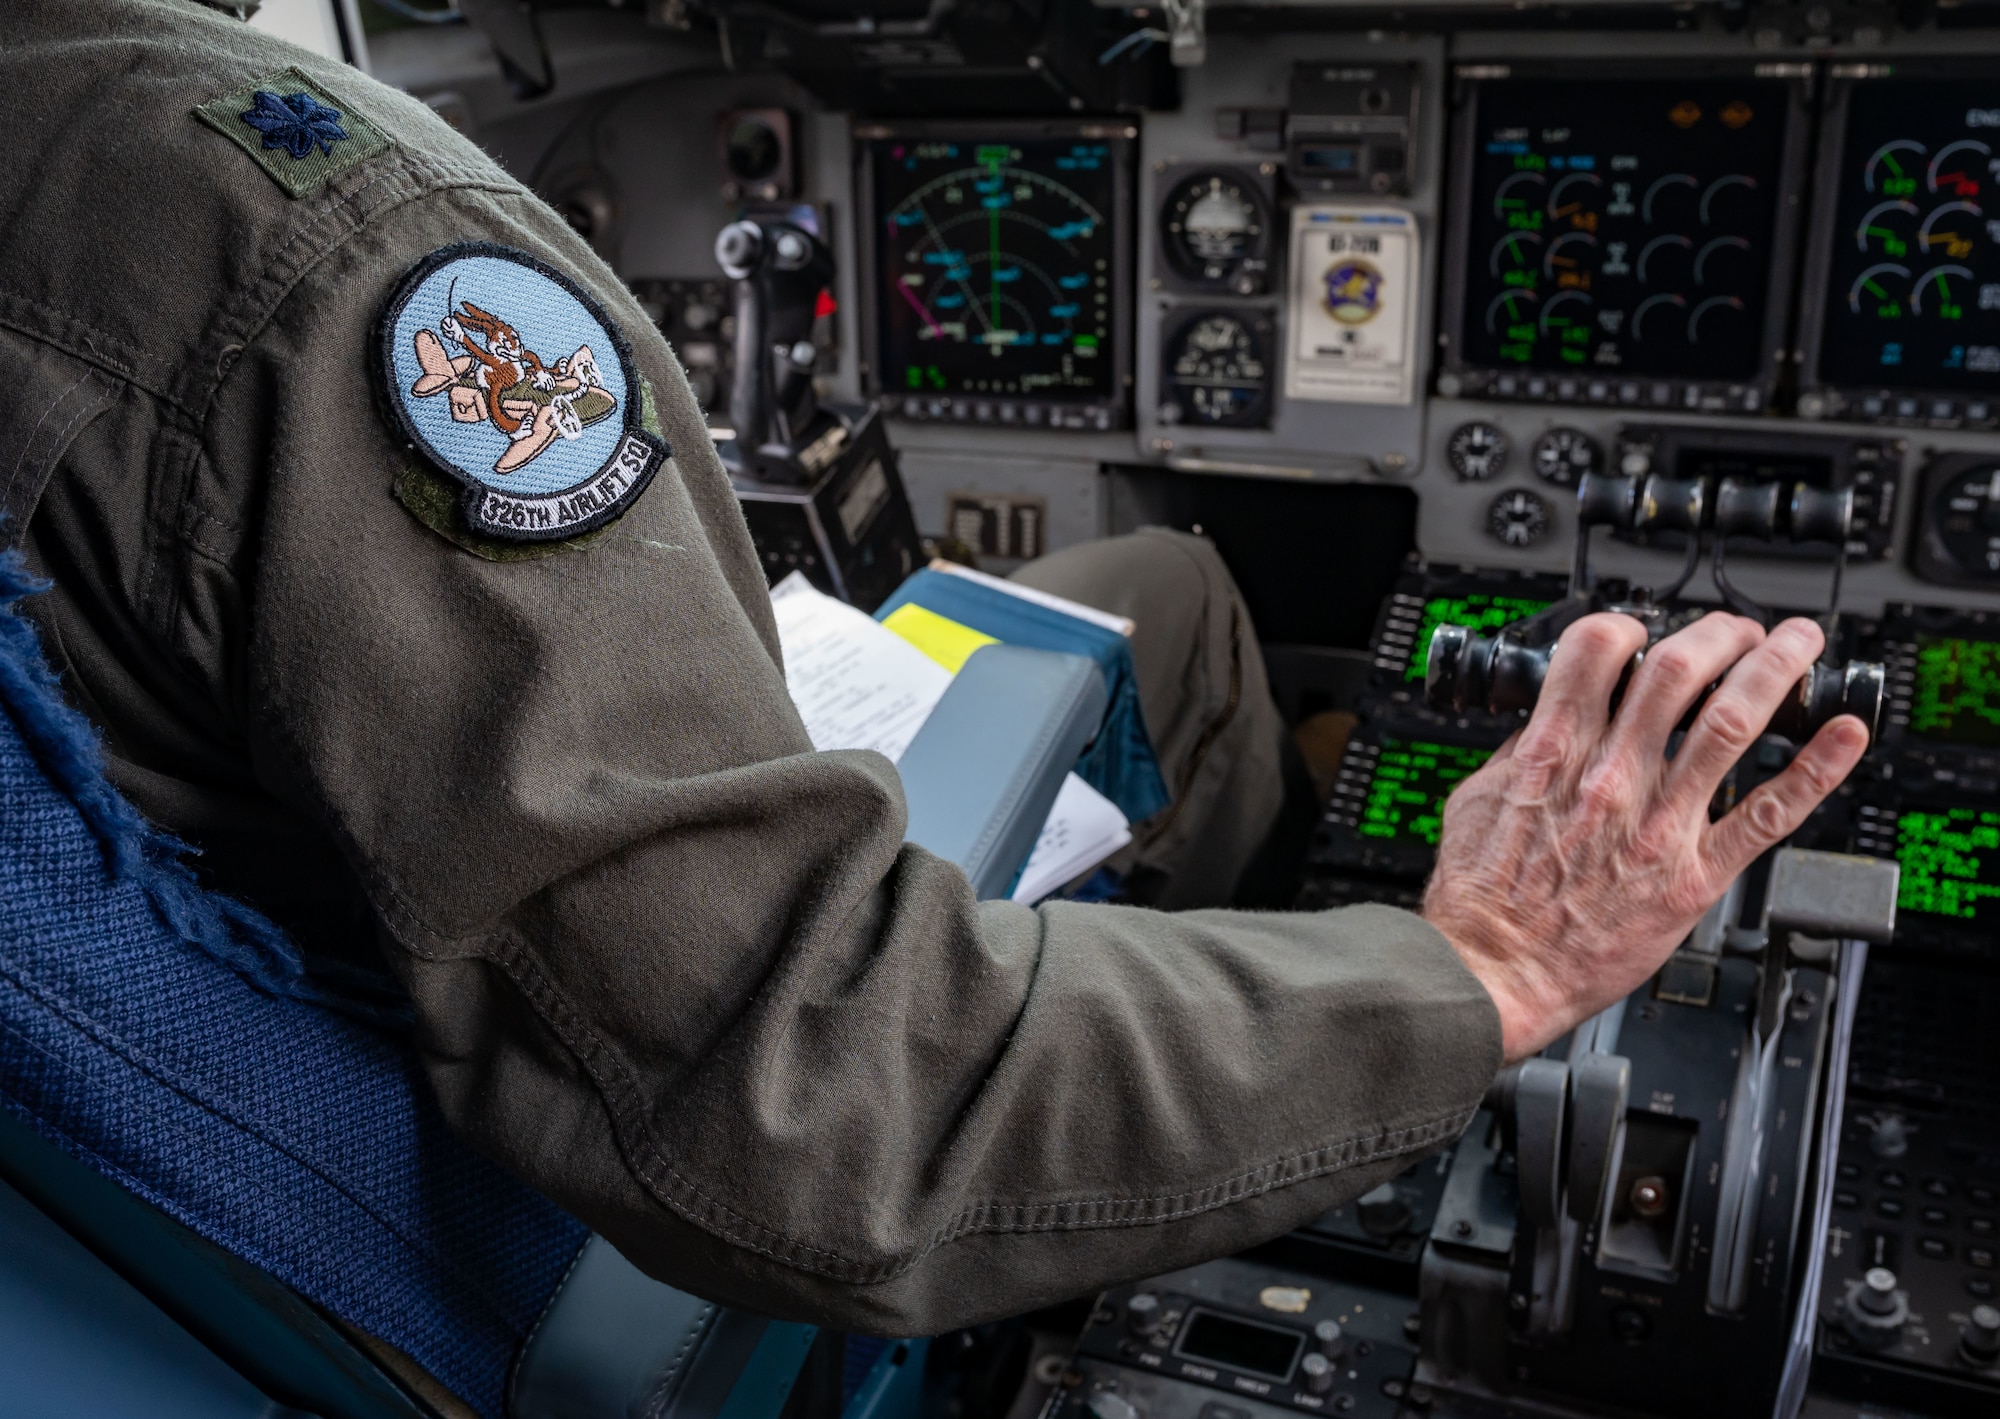 Lt. Col. John Daly, 326th Airlift Squadron pilot, prepares for takeoff on a C-17 Globemaster III at Dover Air Force Base, Delaware, June 3, 2023. ESGR, a Department of Defense office, was established in 1972 to promote cooperation and understanding between Reserve Component Service members and their civilian employers and to assist in resolving conflicts arising from an employee's military commitment. (U.S. Air Force photo by Airman 1st Class Amanda Jett)